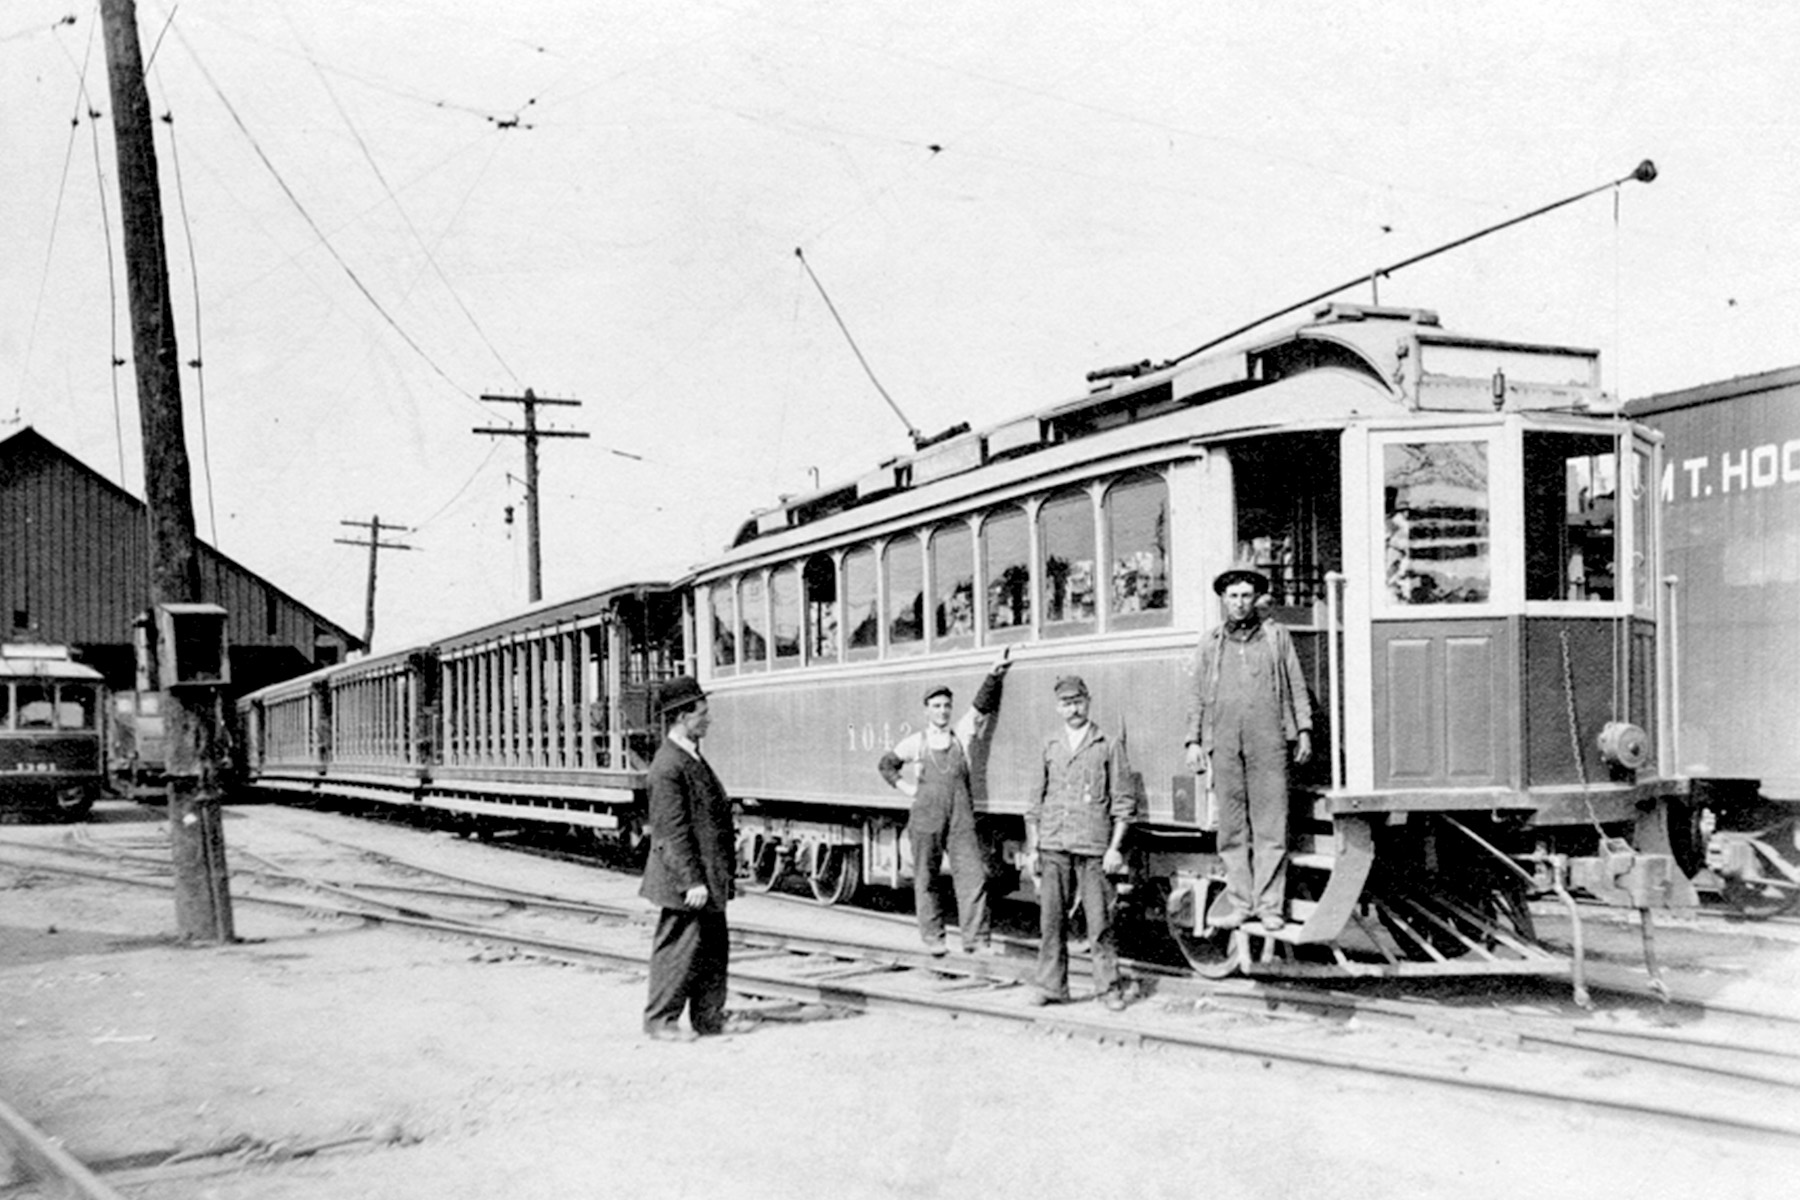 Circa 1910. Before the Type 2 MAX cars, stairs had always been the only way to get on to a rail car